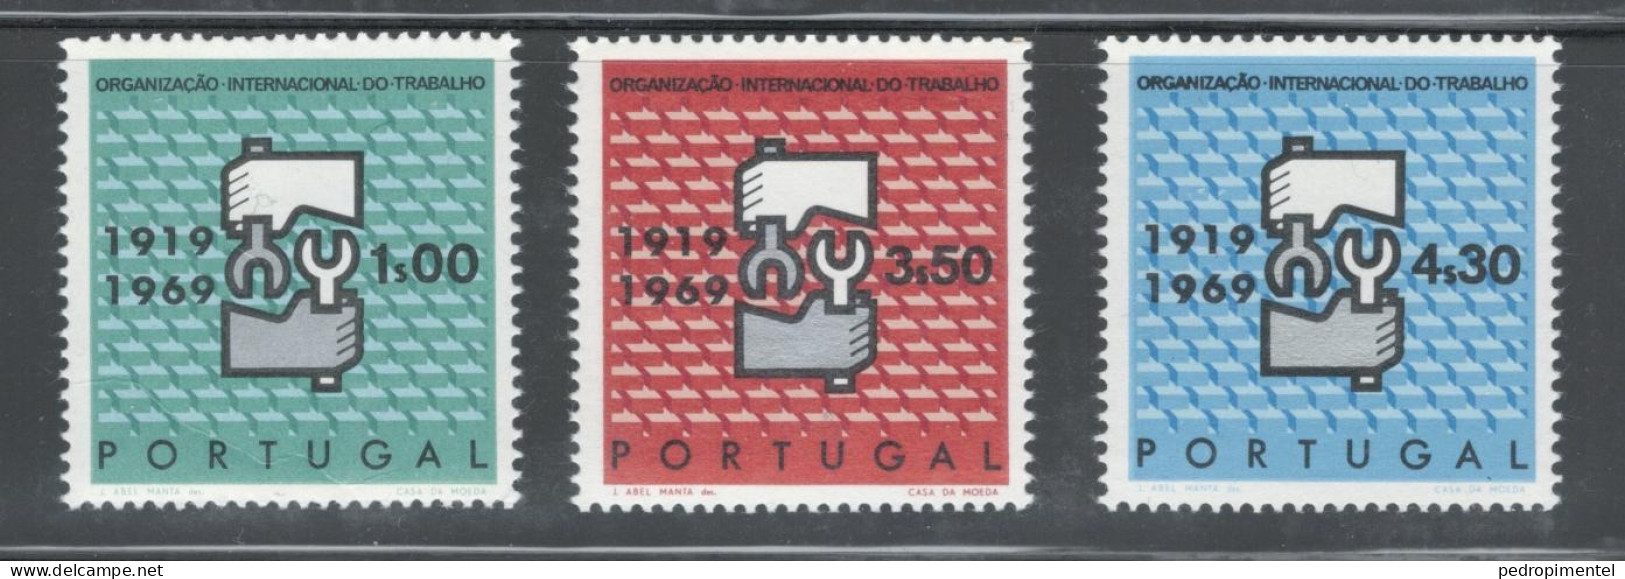 Portugal Stamps 1969 "OIT" Condition MNH #1047-1049 - Unused Stamps